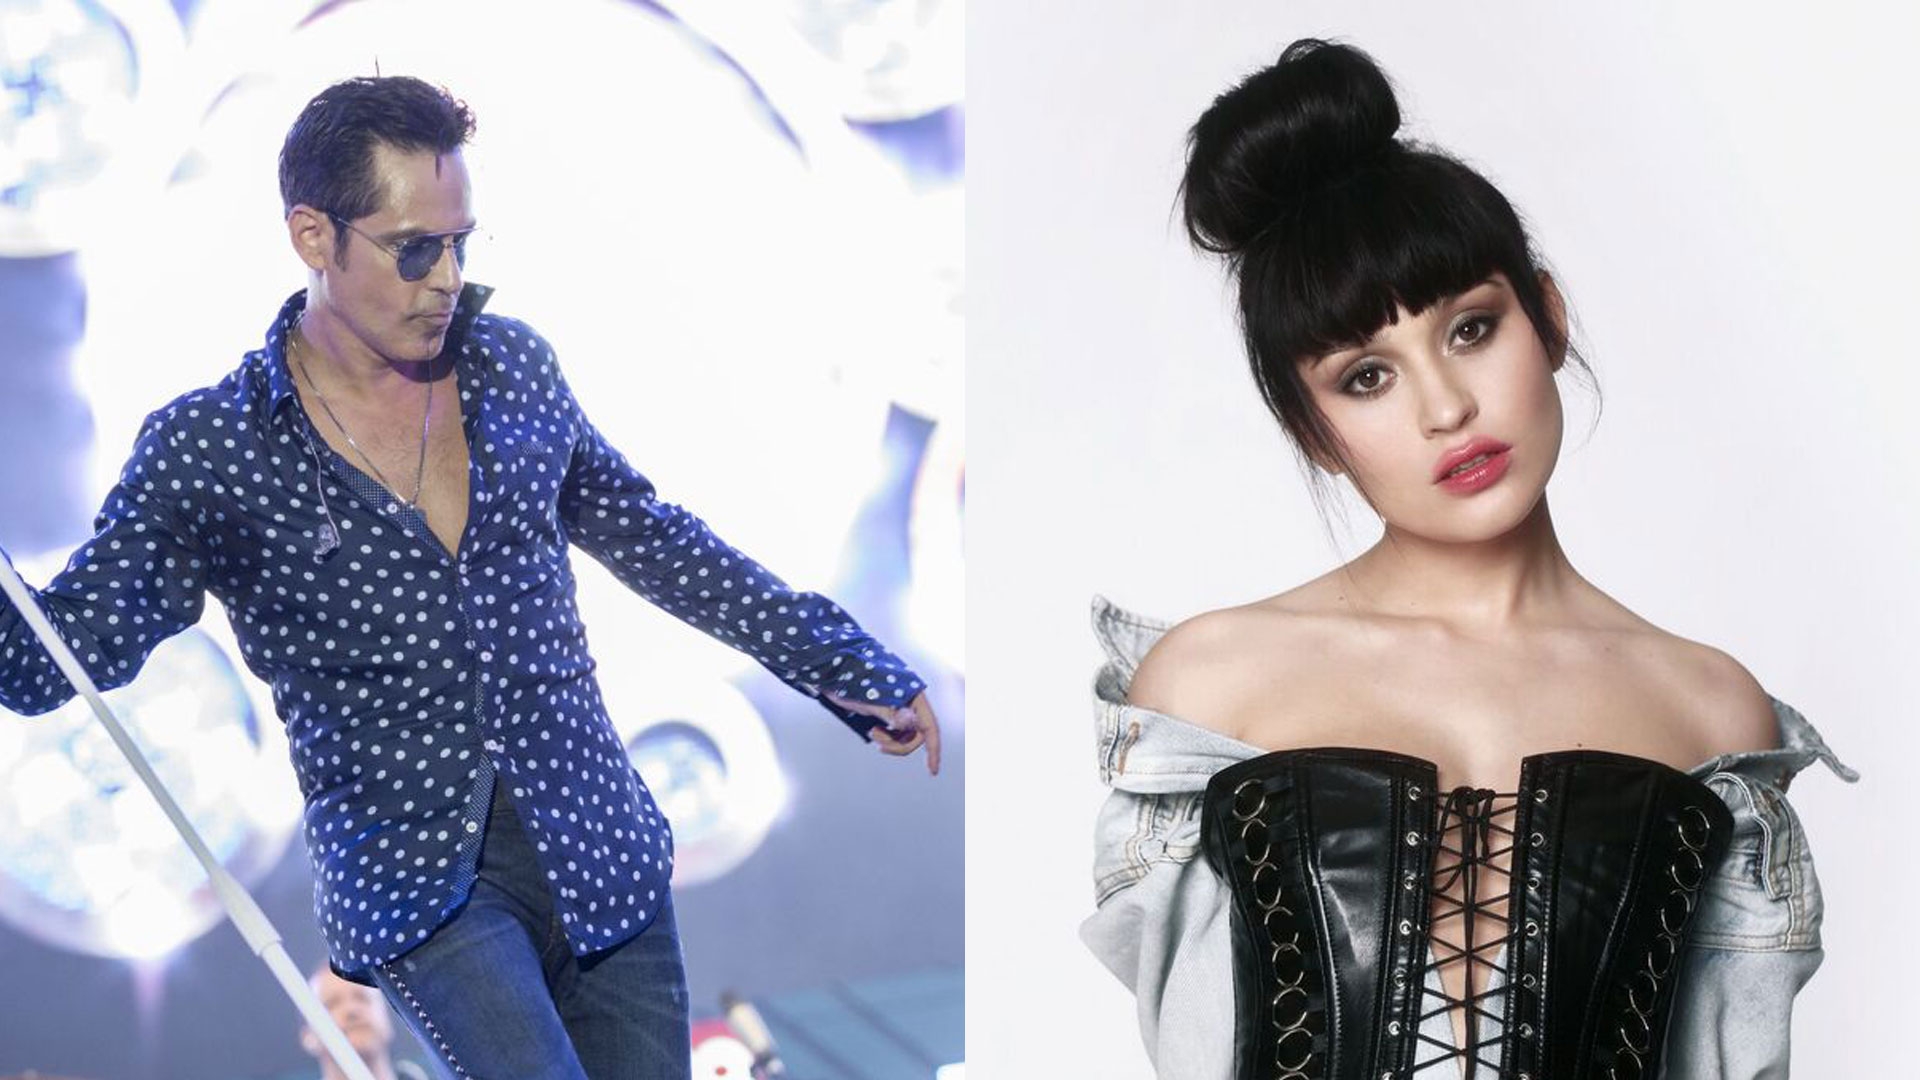 Golden Stag 2019: Ştefan Bănică jr. and Irina Rimes will open the series of the performances 